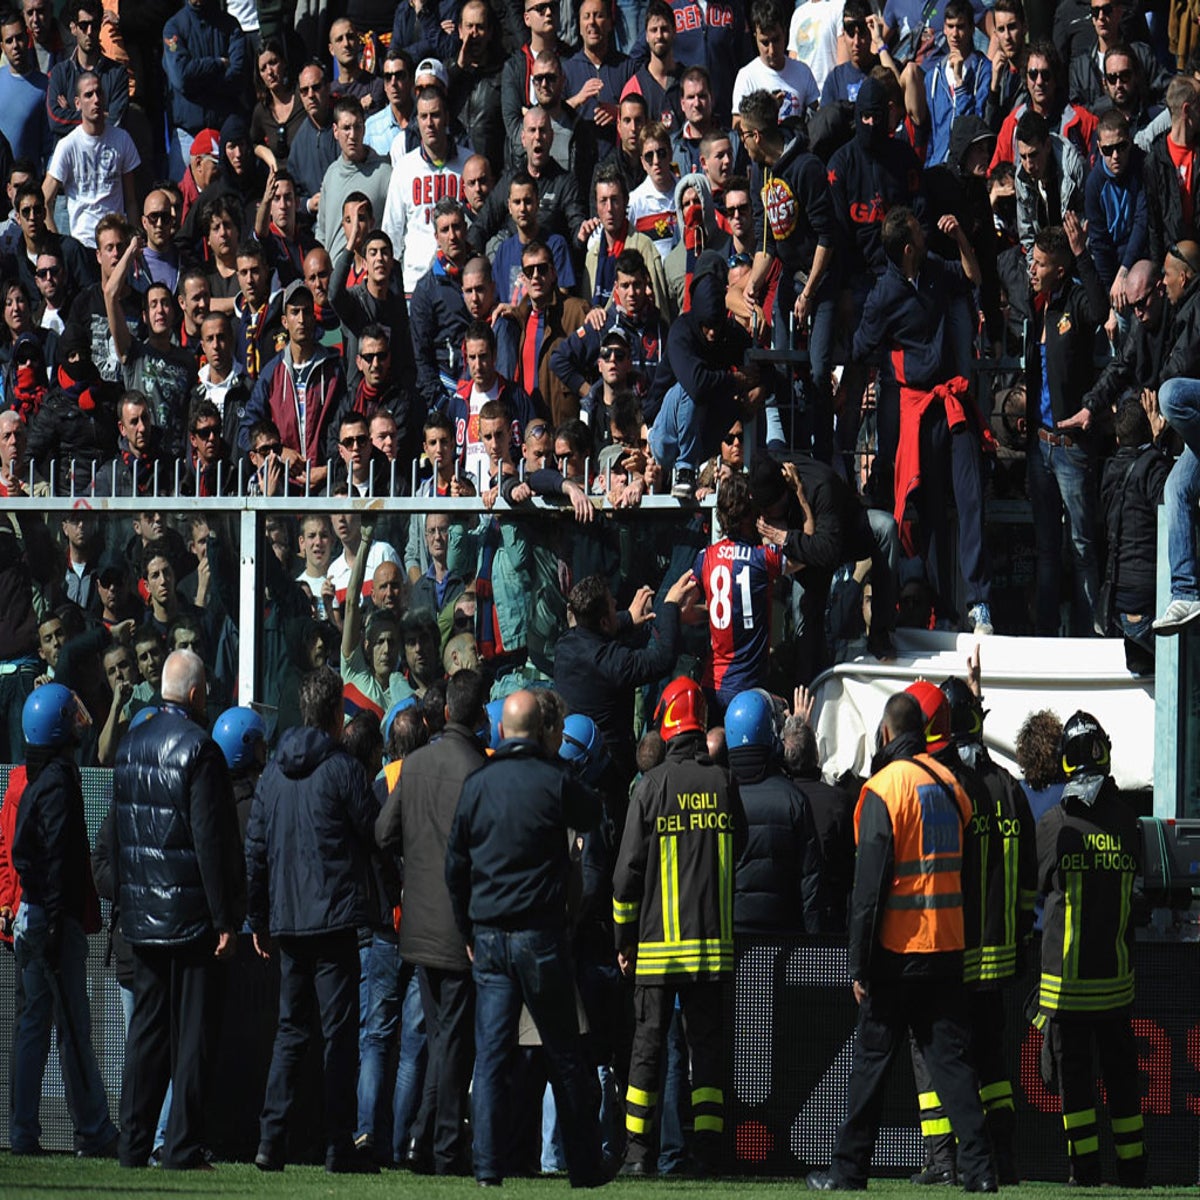 Genoa FC supporters hold 43 minutes of silence to honor victims